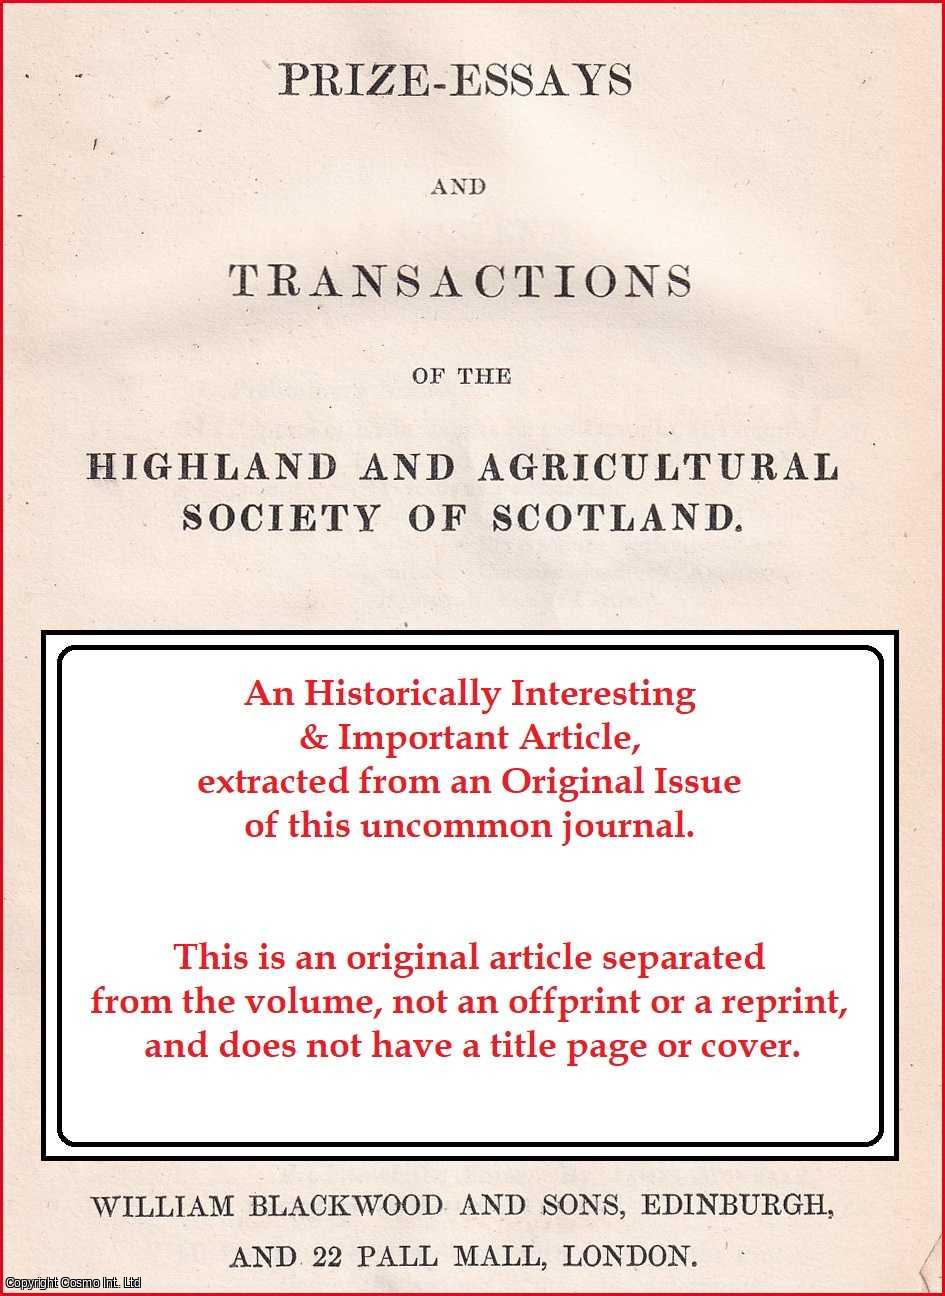 John Boswell Esq, of Balmuto & Kingcausie. - The Breeding of Live Stock, & on the Comparative Influence of the Male & Female Parents in impressing the Offspring. An uncommon original article from the Prize Essays and Transactions of the Highland Society of Scotland, 1829.